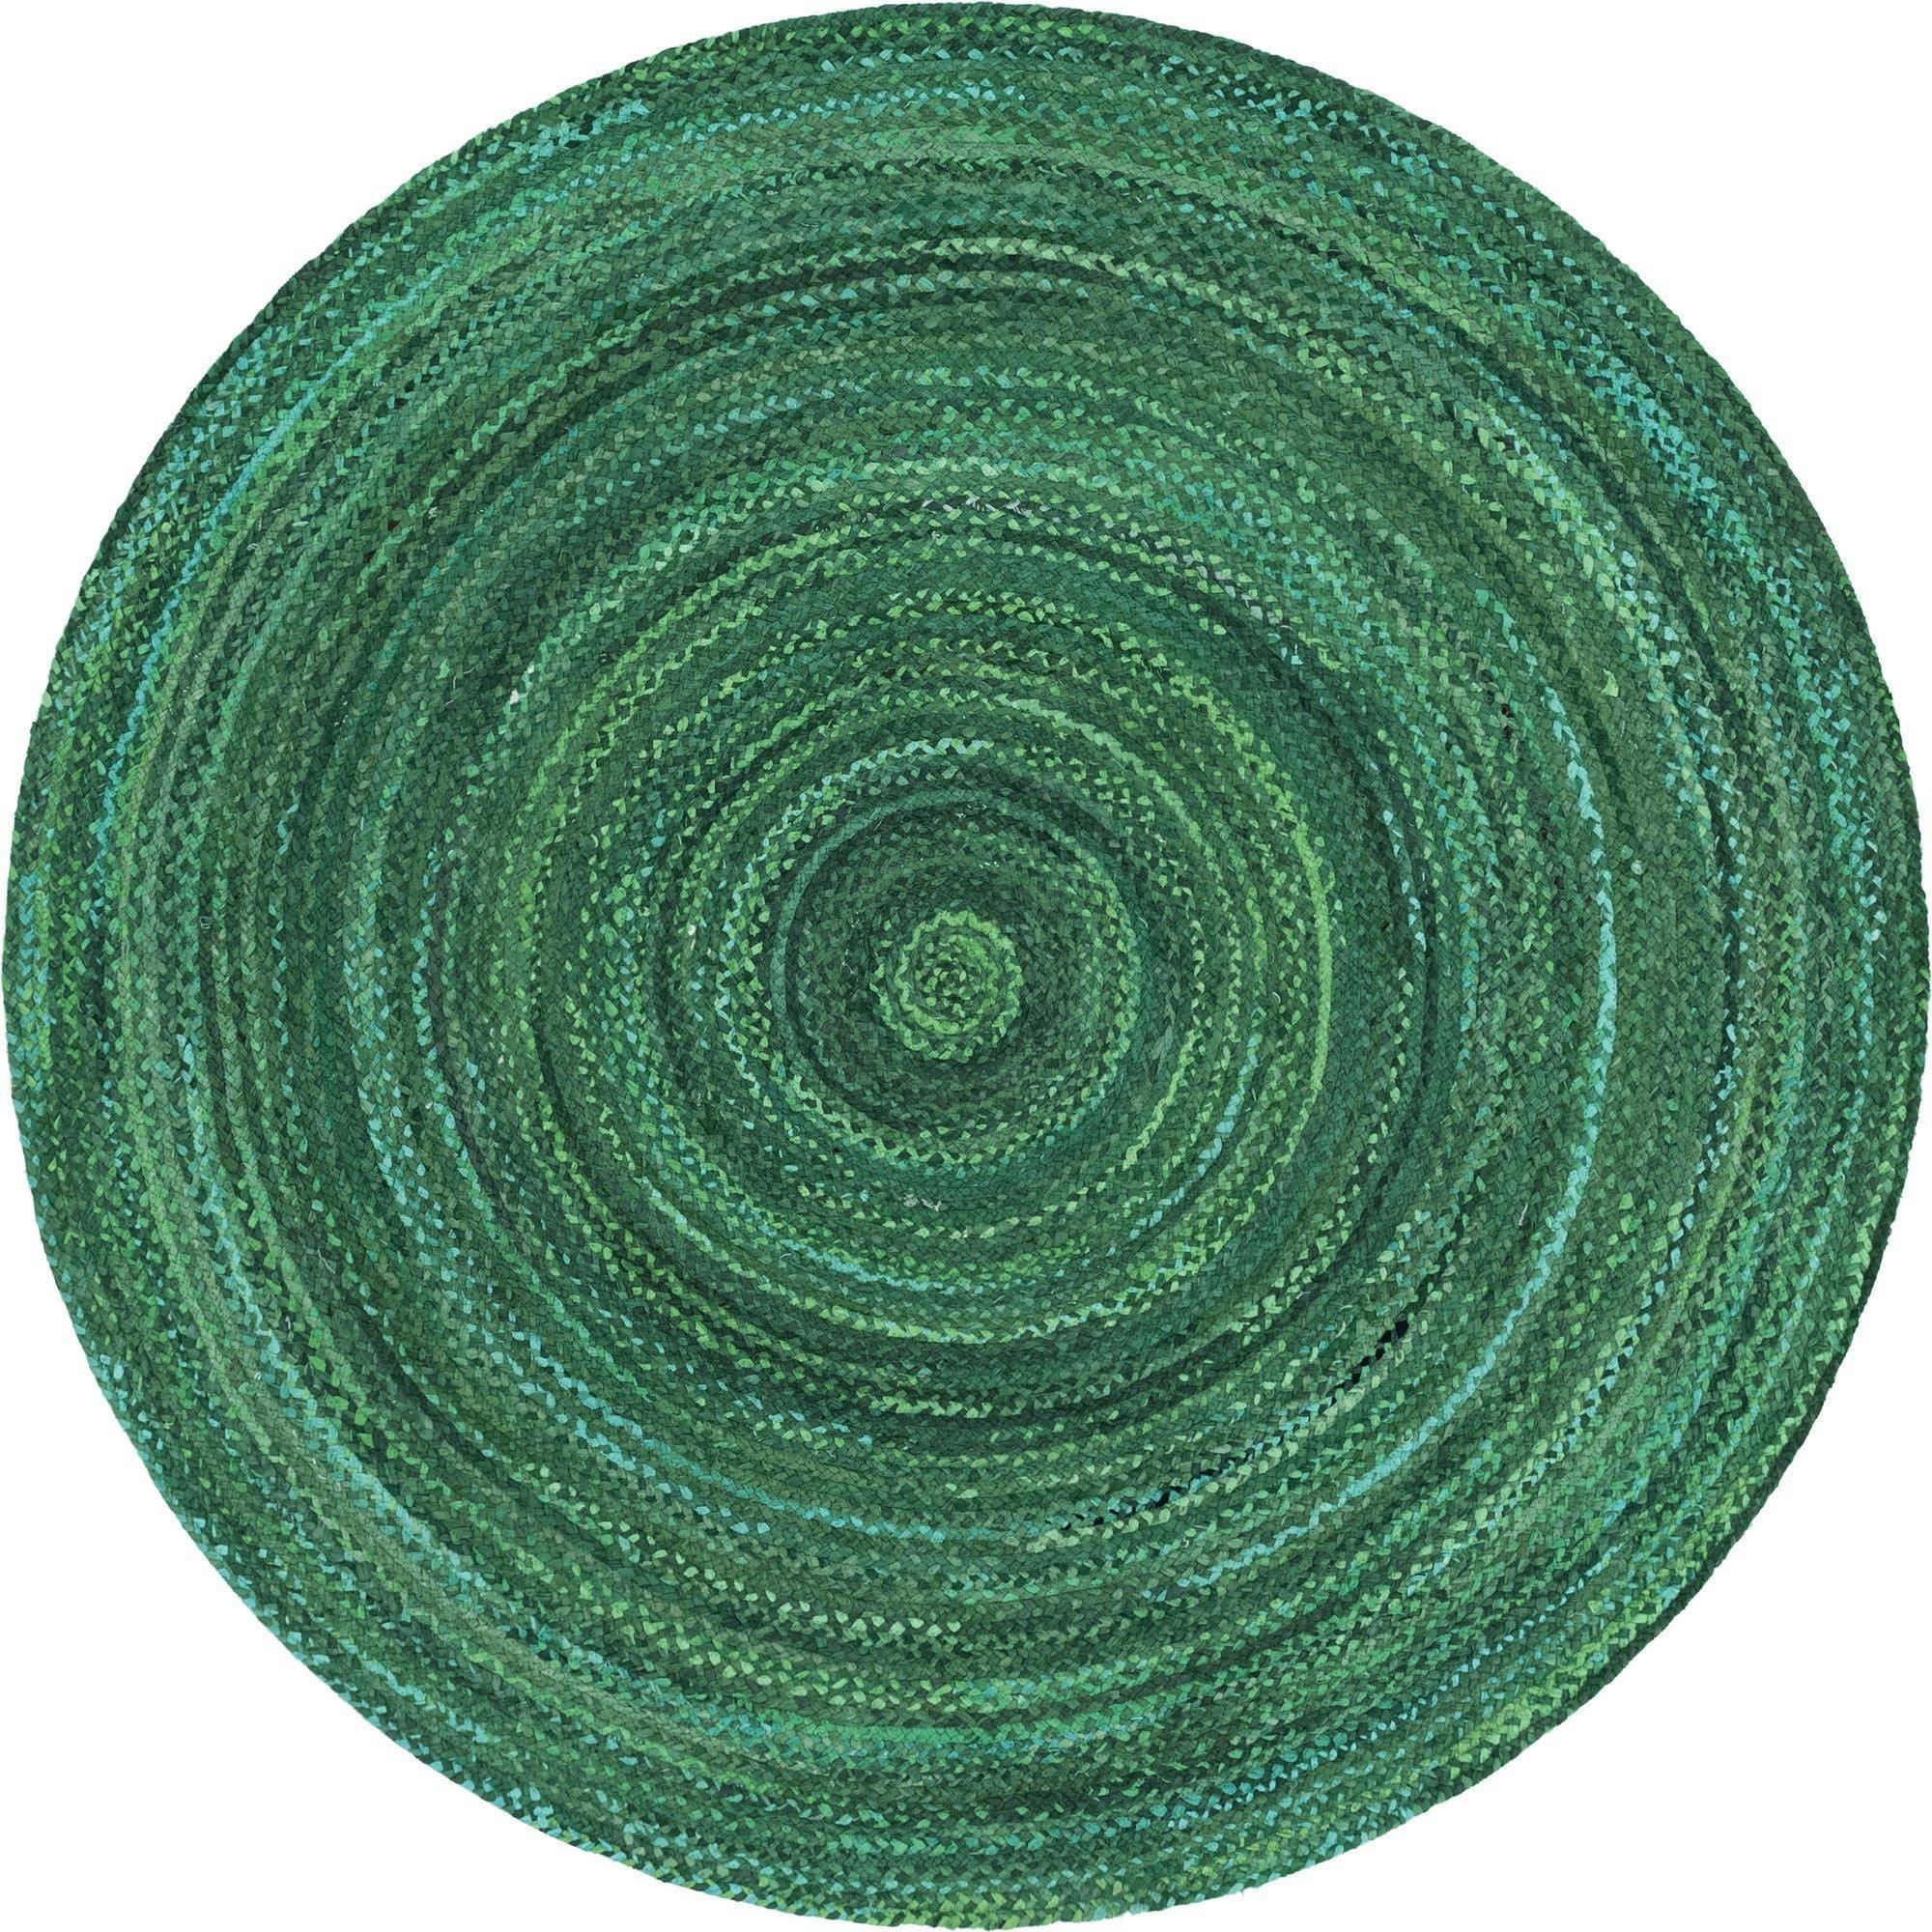 Handmade Braided Chindi 8 ft Round Rug in Green and Turquoise